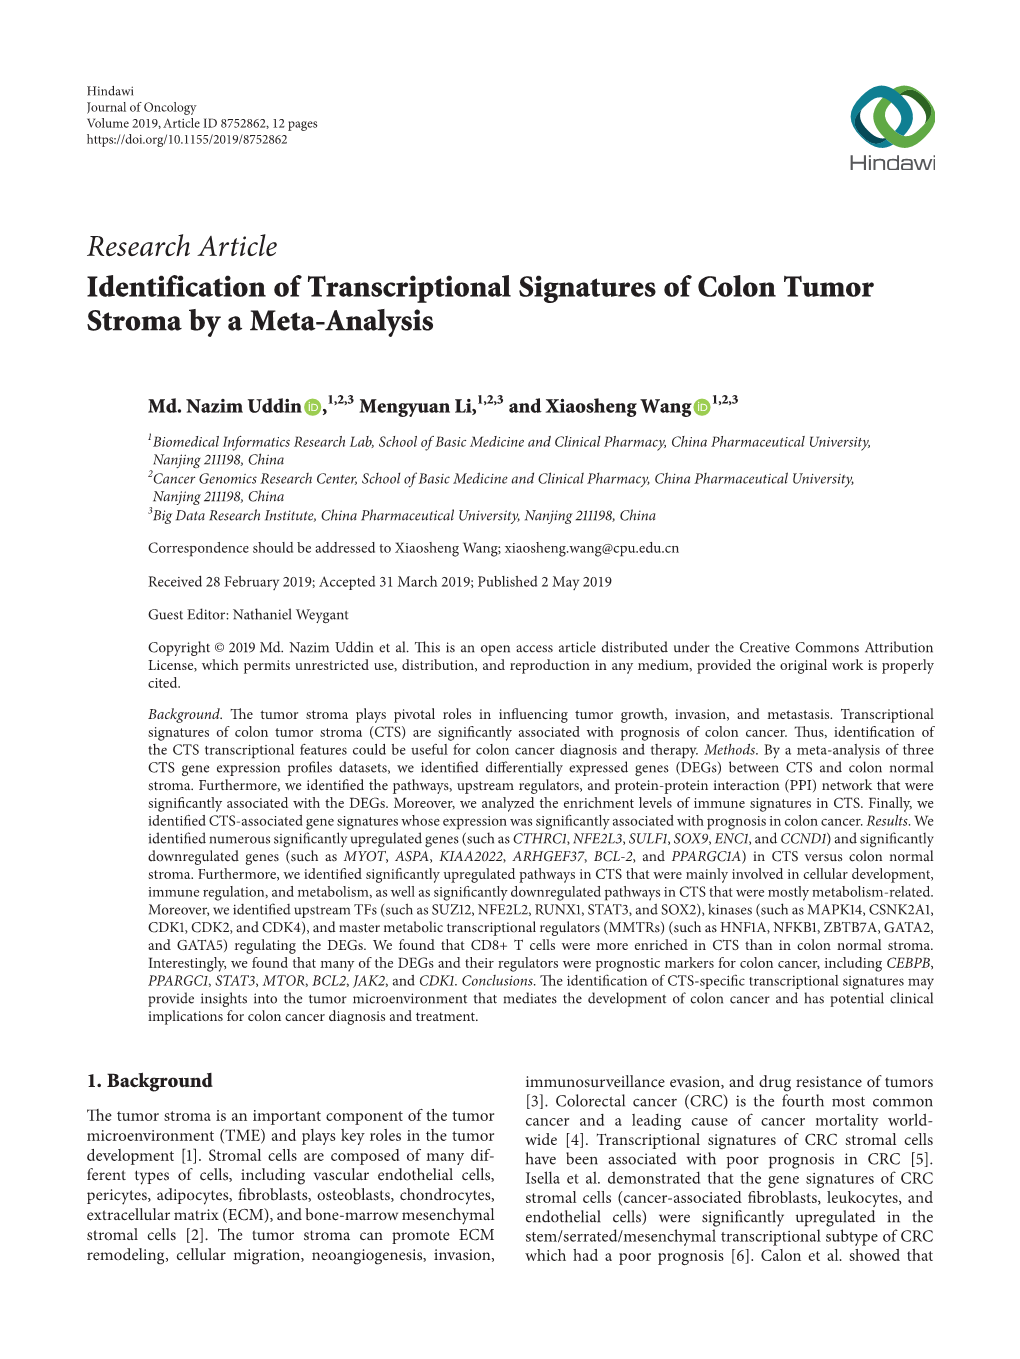 Identification of Transcriptional Signatures of Colon Tumor Stroma by a Meta-Analysis